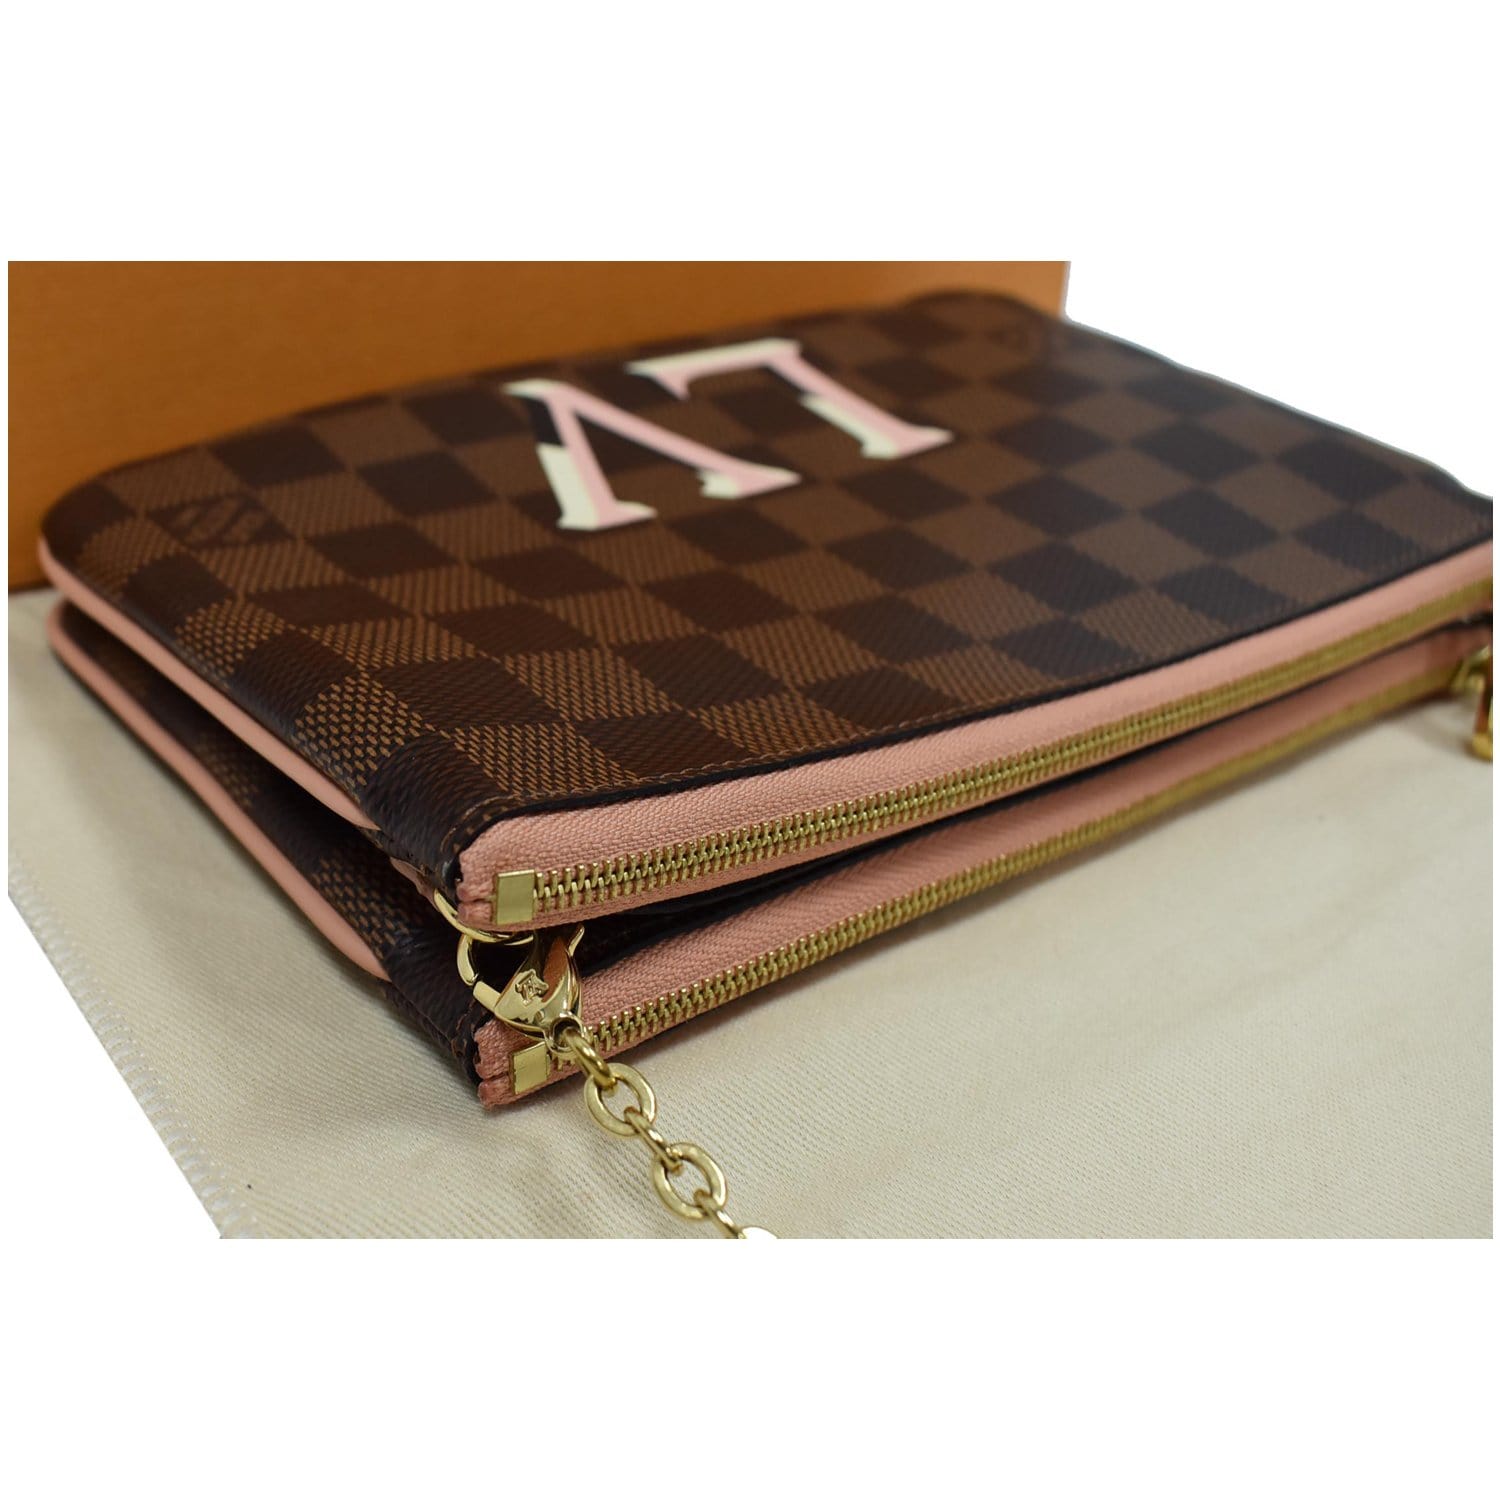 Double Zip Pochette Damier Azur Canvas - Wallets and Small Leather